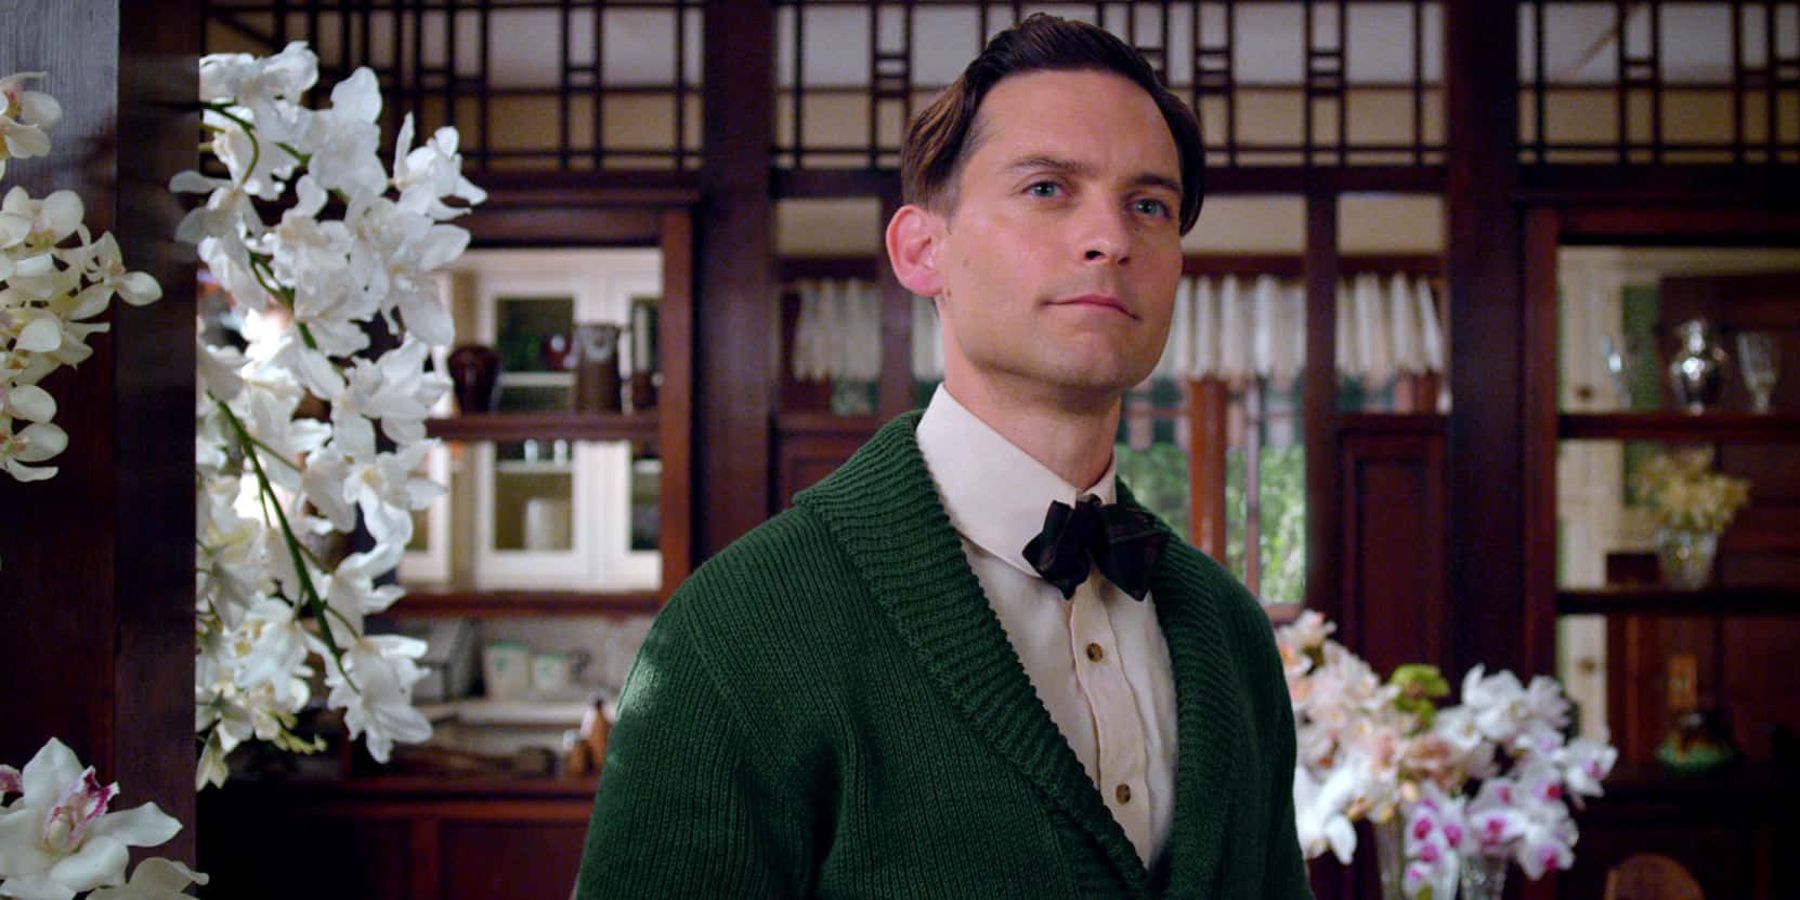 Nick Carraway in Gatsby's cottage in the movie The Great Gatsby.